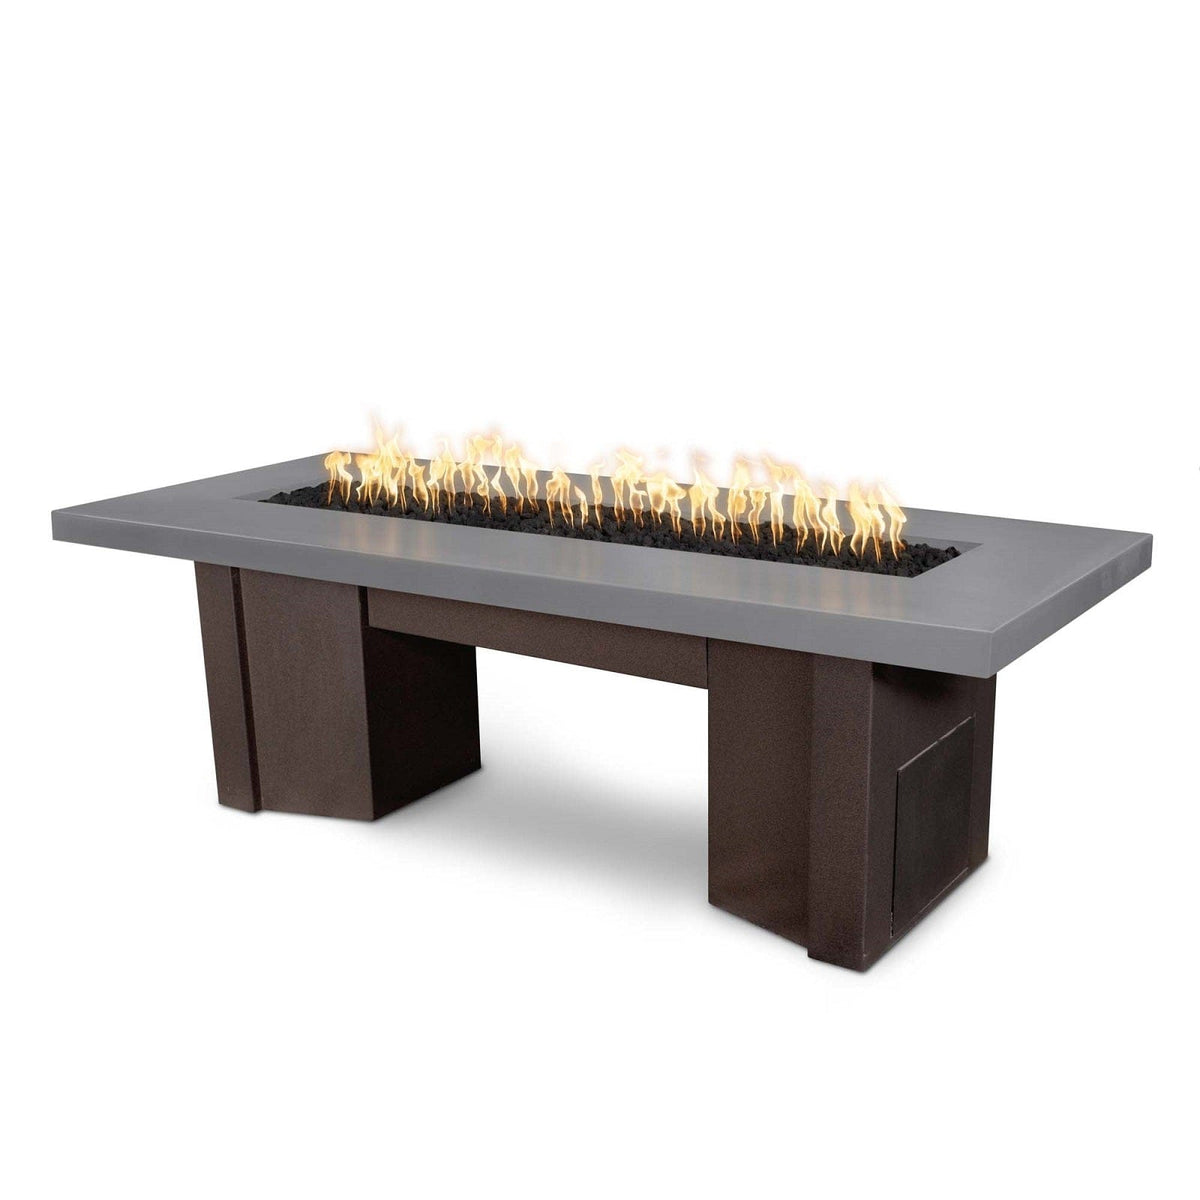 The Outdoor Plus Fire Features Natural Gray (-NGY) / Java Powder Coated Steel (-JAV) The Outdoor Plus 60&quot; Alameda Fire Table Smooth Concrete in Natural Gas - Flame Sense System with Push Button Spark Igniter / OPT-ALMGFRC60FSEN-NG